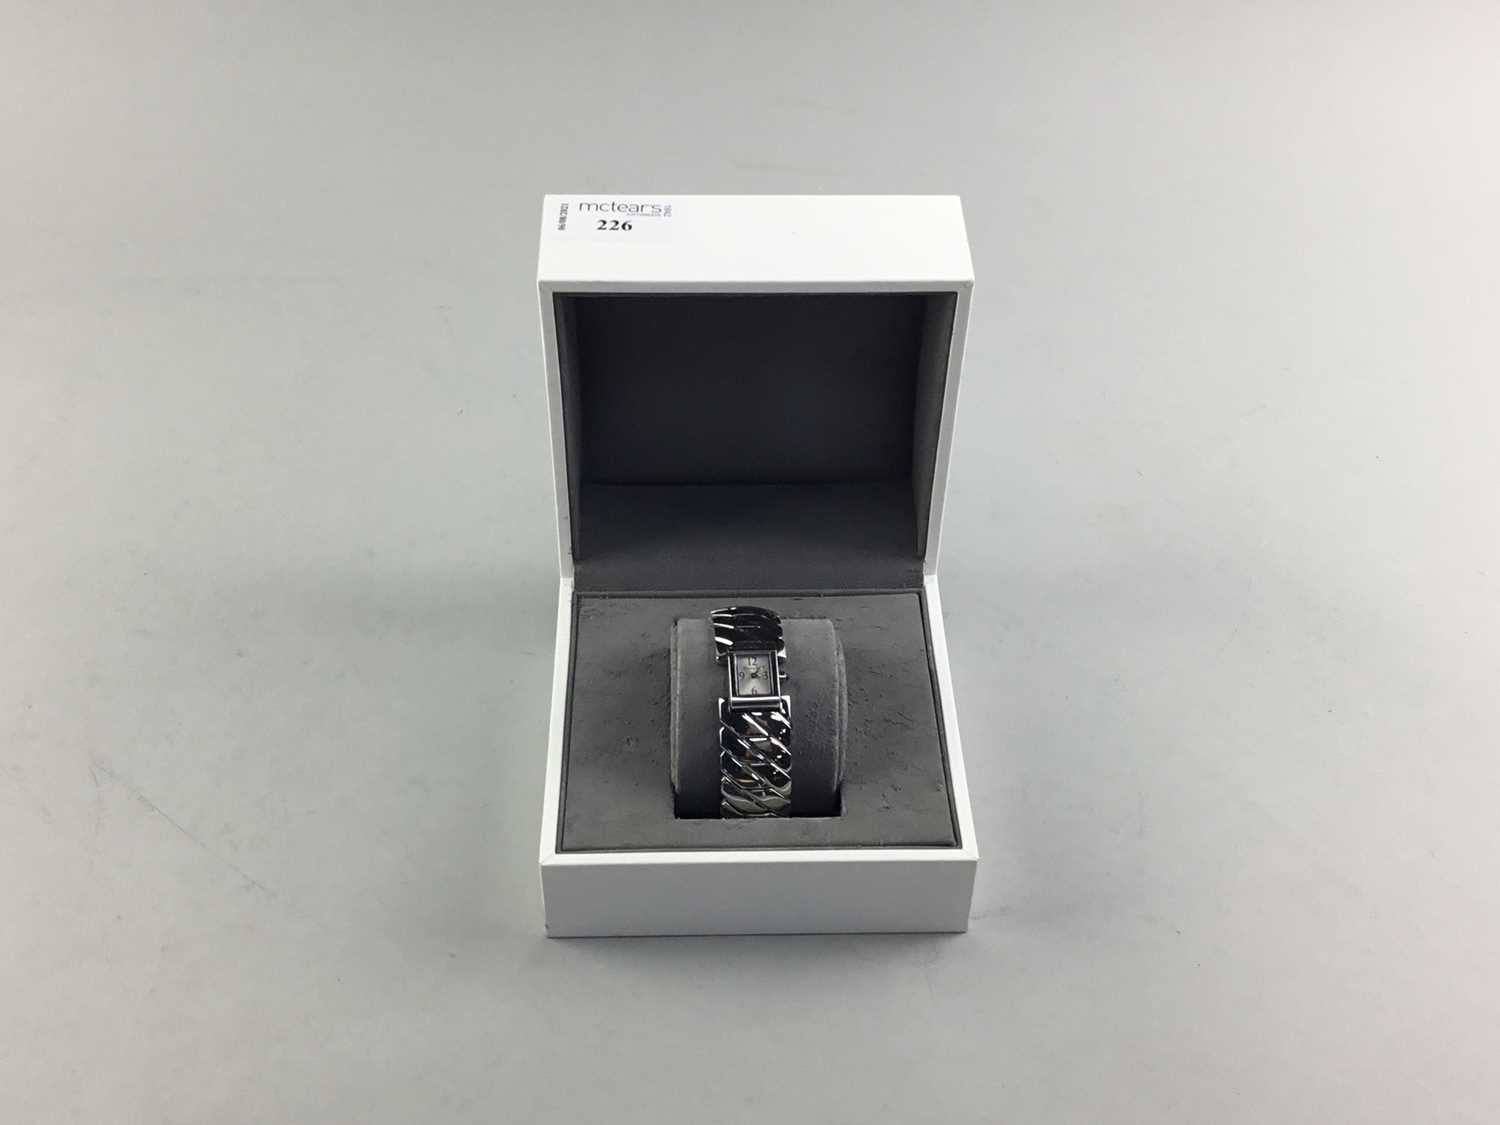 Lot 226 - A CHRISTIAN DIOR STAINLESS STEEL LADIES WRIST WATCH